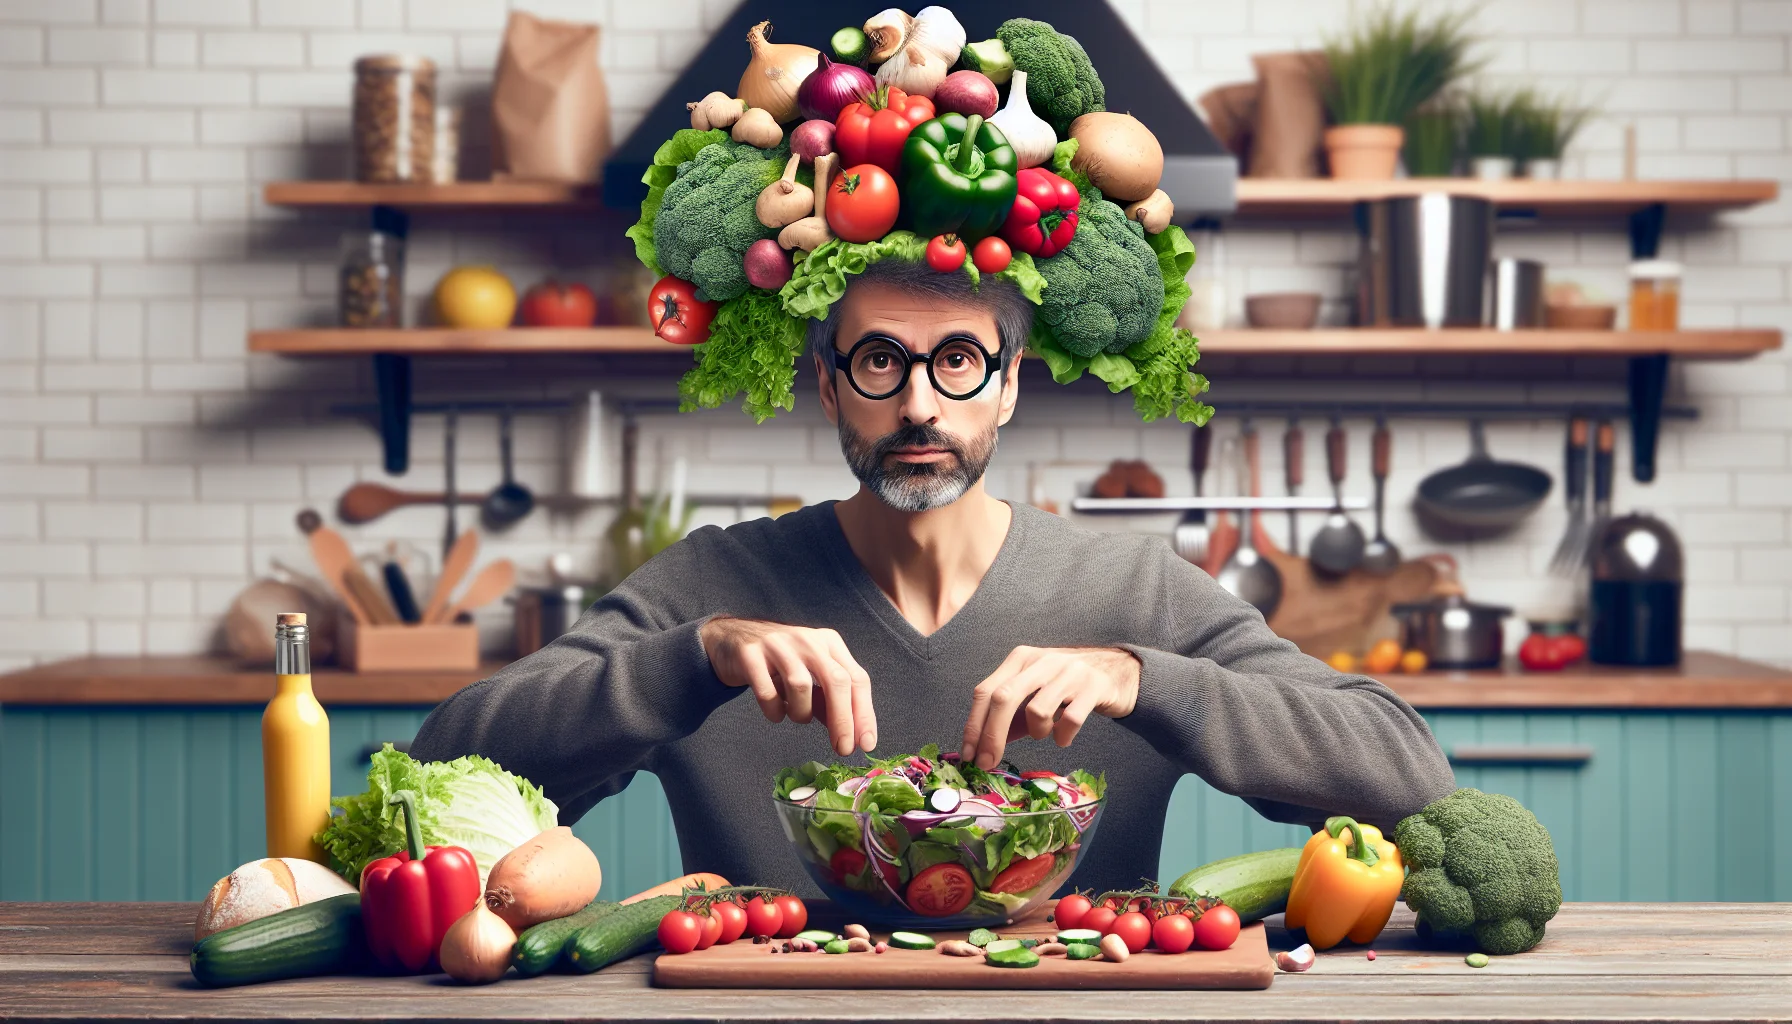 Create a realistic image showcasing a food enthusiast, bearing resemblance to an average height man with glasses and graying hair, in a funny situation that encourages people to eat healthily for less money. The scene could perhaps include him humorously balancing a variety of colorful vegetables on his head and arms, all while preparing a budget-friendly, hearty salad in a bustling kitchen.